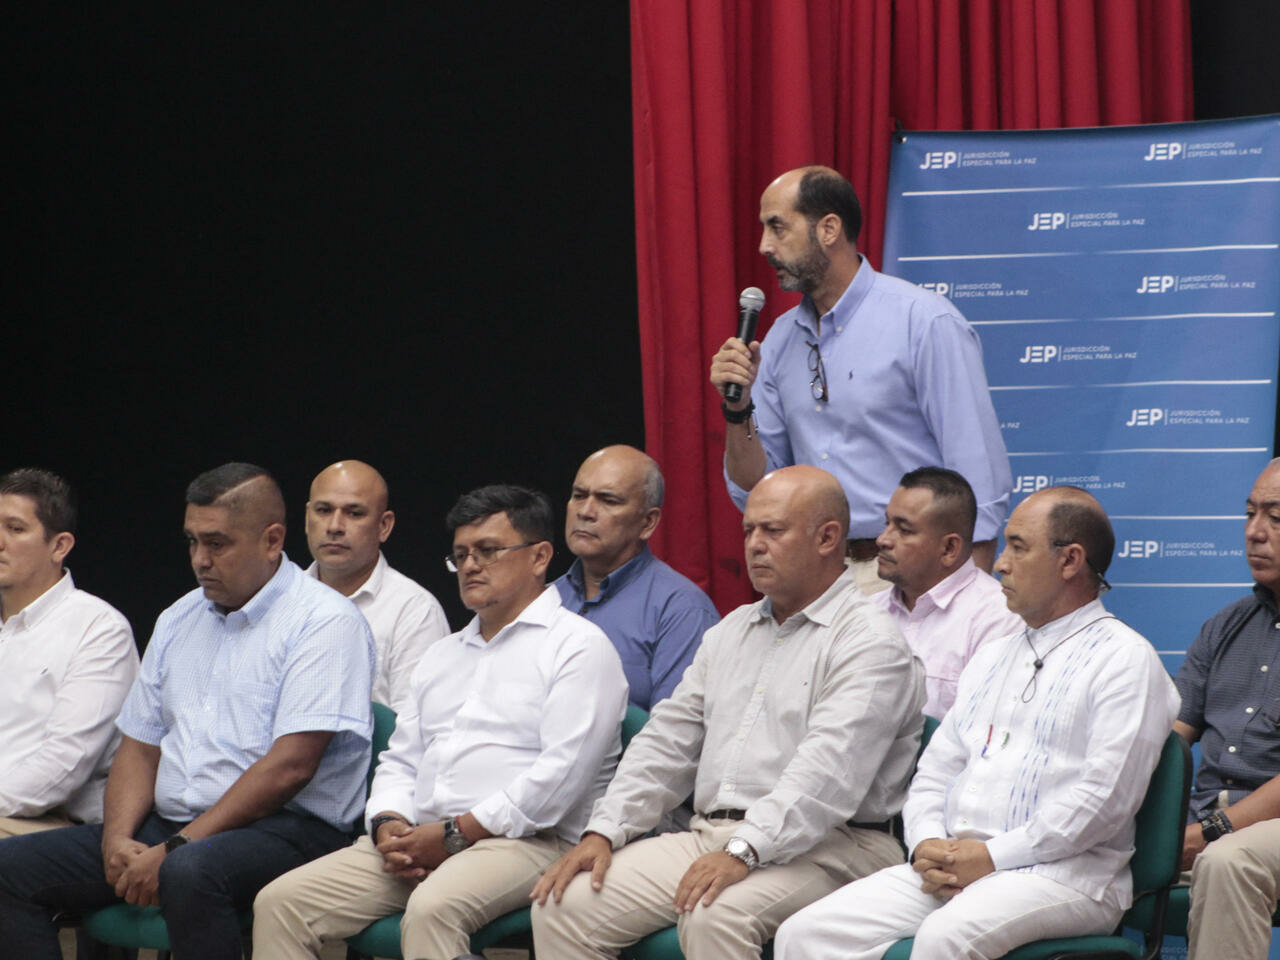 Former members of the Colombian Armed Forces speak in front of victims' families during a hearing organized by the Special Jurisdiction for Peace (JEP) in Ocana, Colombia, on April 26, 2022. - Ten retired members of Colombia's military on Tuesday began admitting to victims' families responsibility for the assassination of 120 civilians later presented as rebels killed in combat.